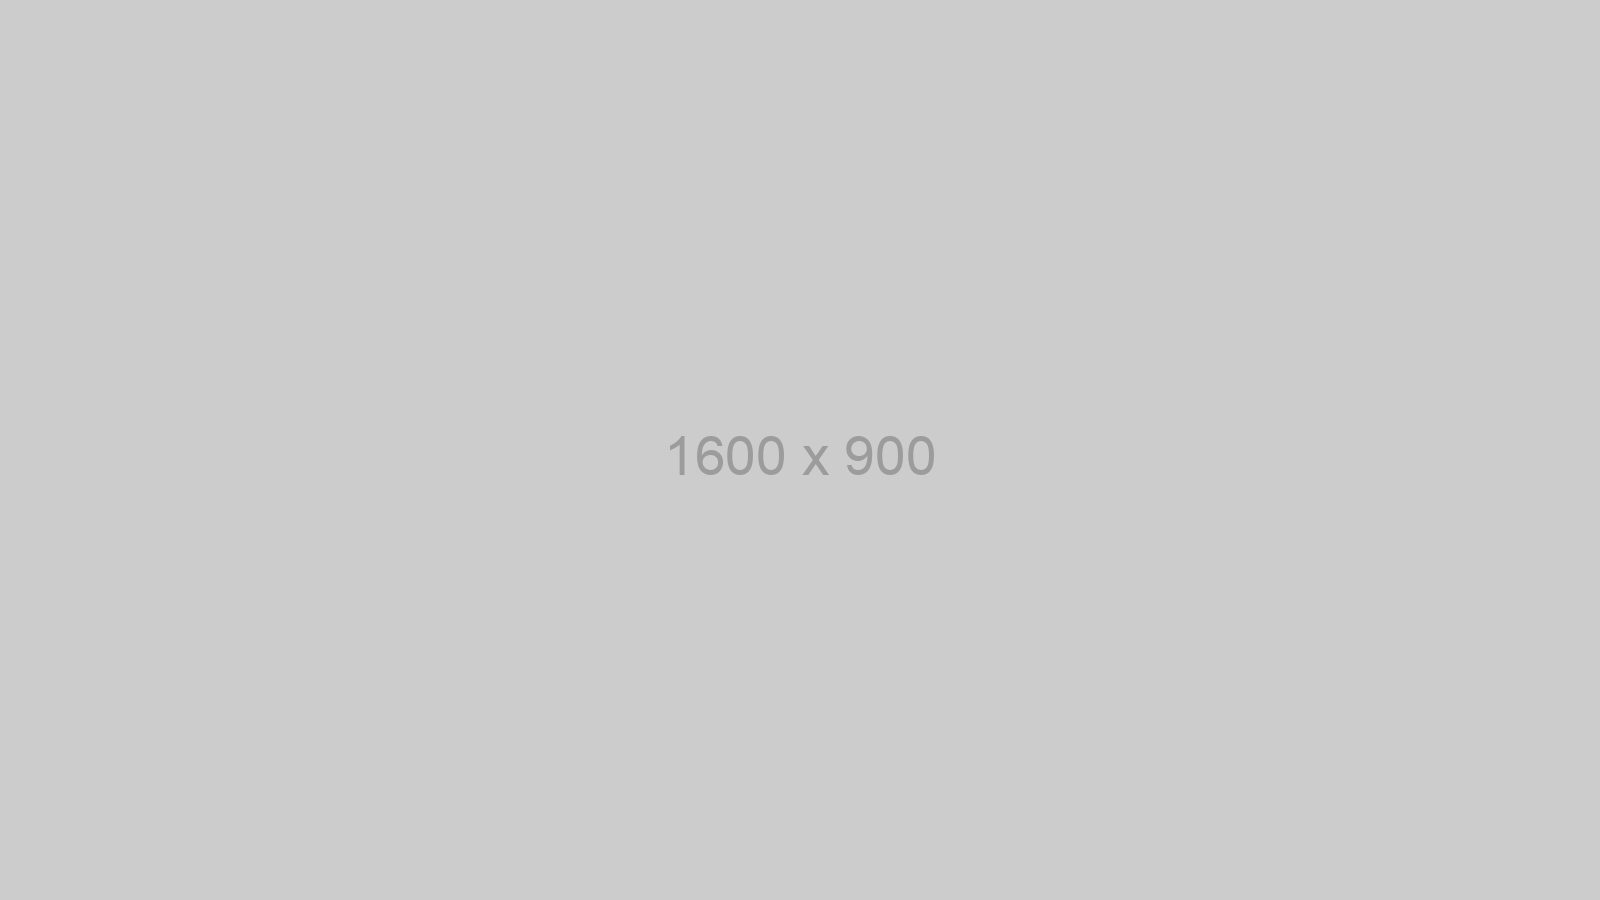 A gray placeholder image that just says 1600x900